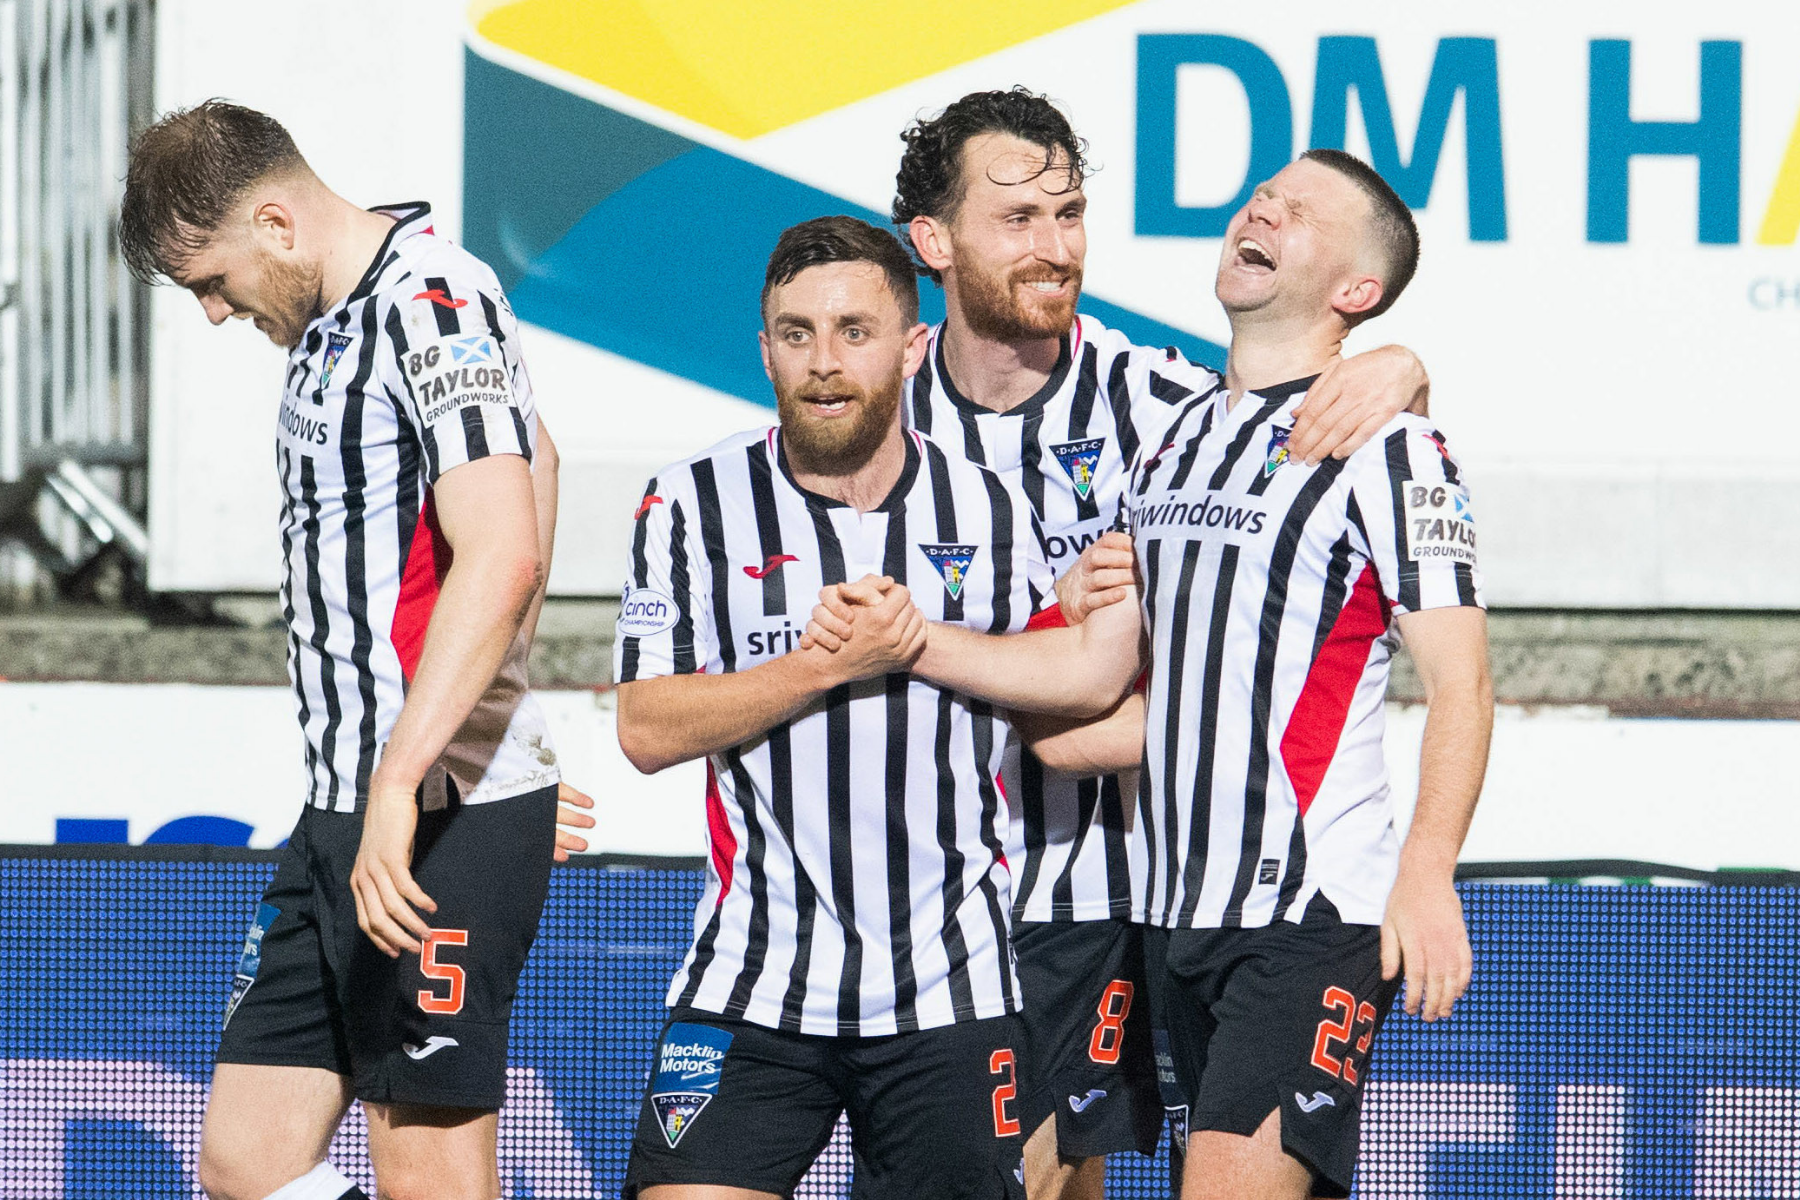 Dunfermline 4 Partick Thistle 1: John Hughes side claim vital victory to lift them off bottom as Jags slump continues